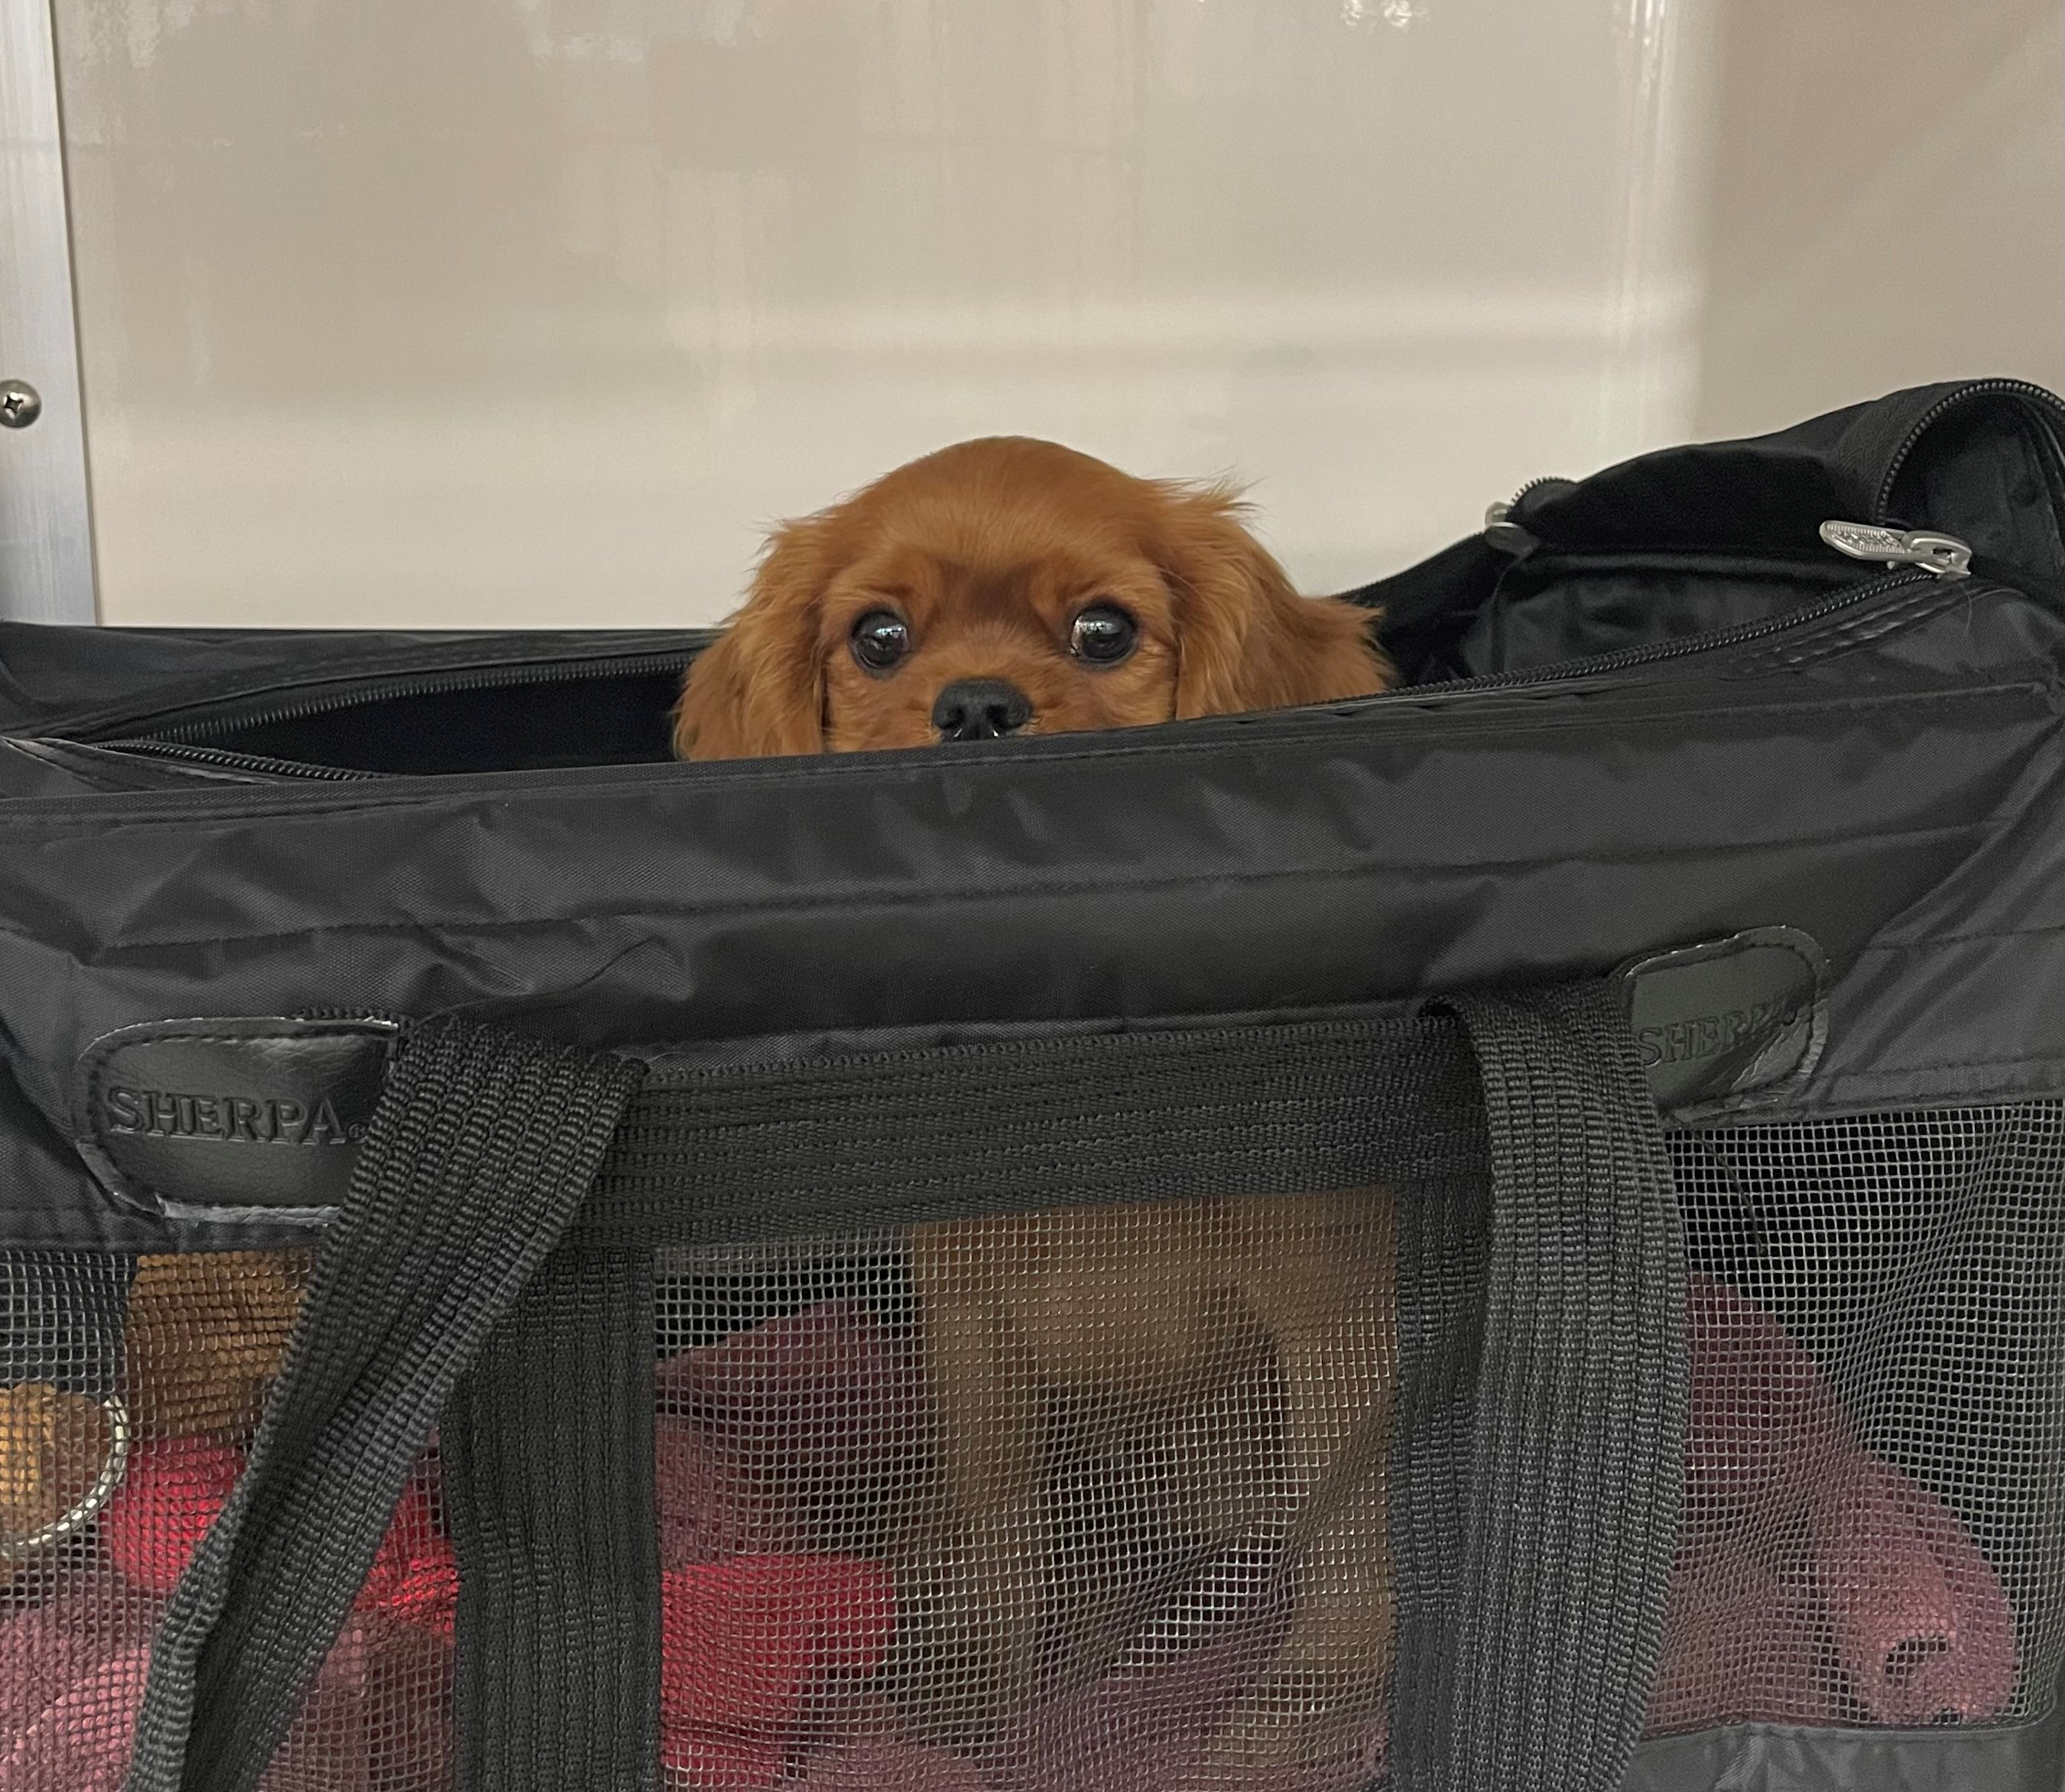 USDA APHIS  Pet Travel - Bringing Pet Dogs into the United States